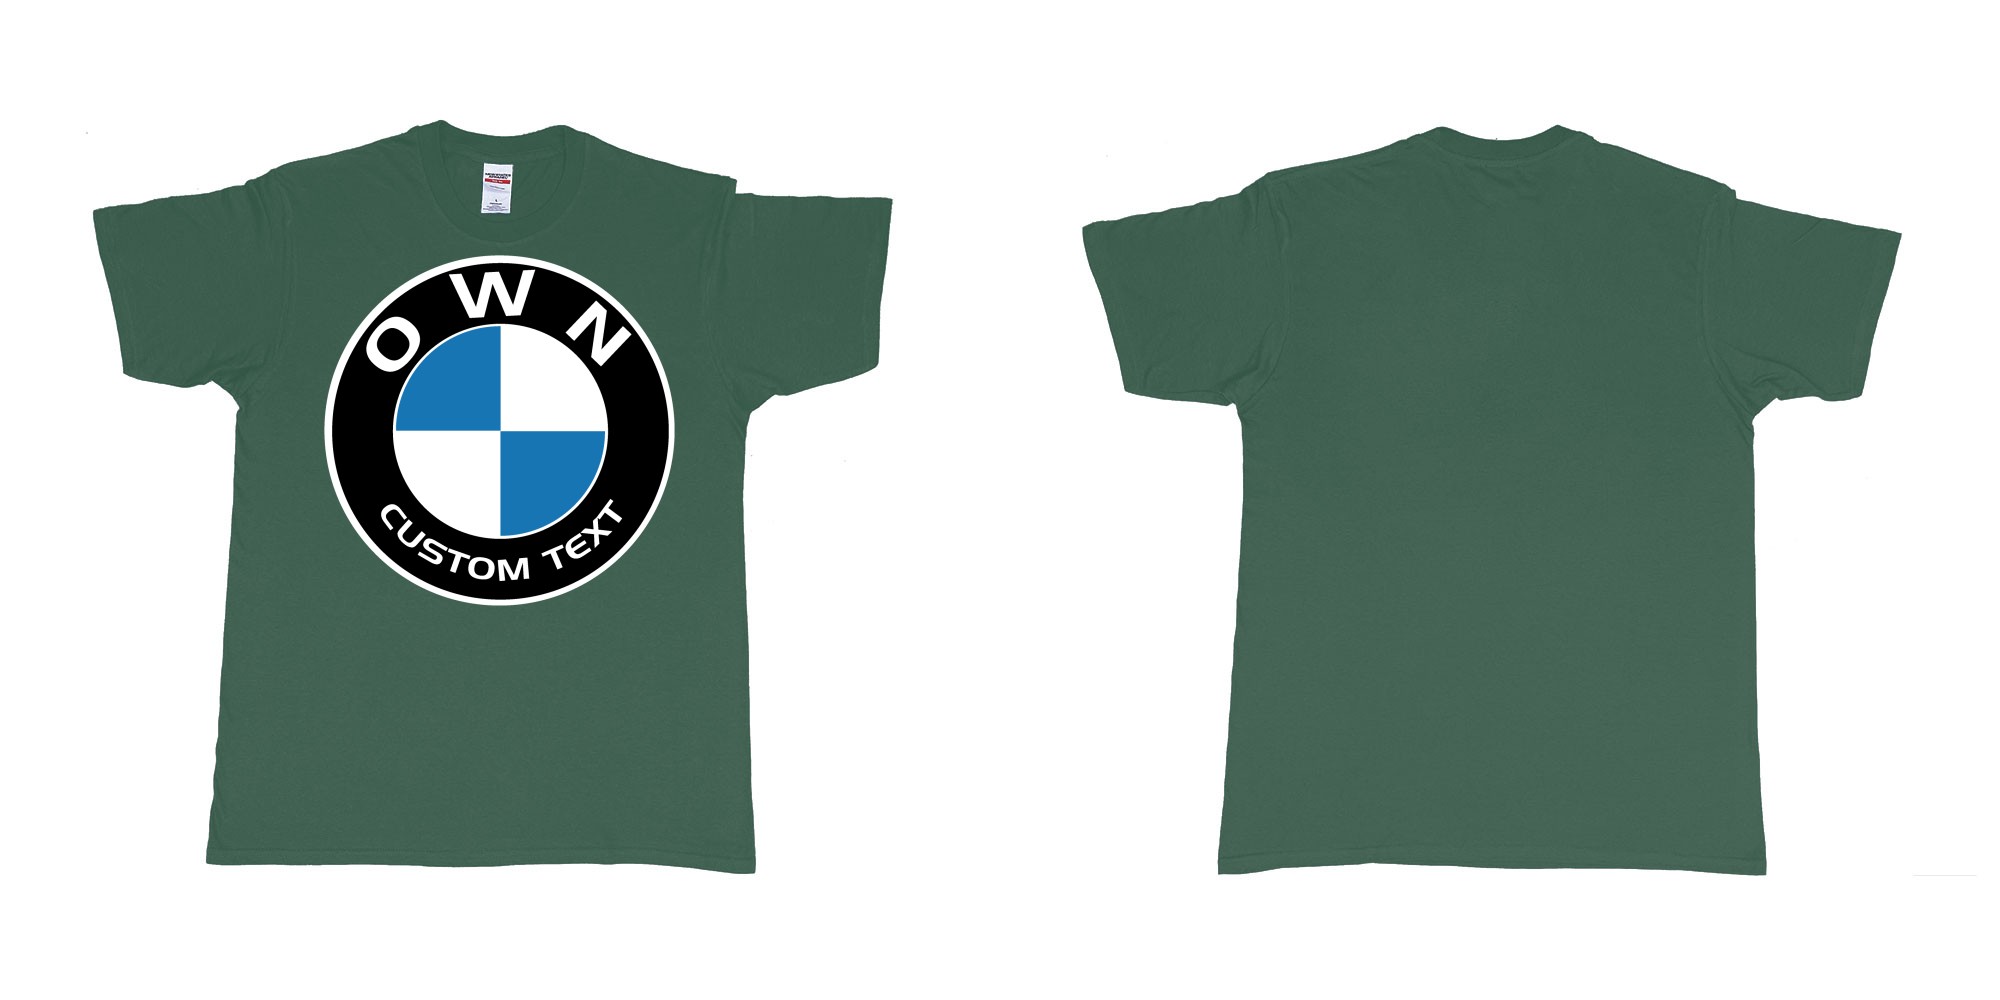 Custom tshirt design BMW logo custom text tshirt printing in fabric color forest-green choice your own text made in Bali by The Pirate Way